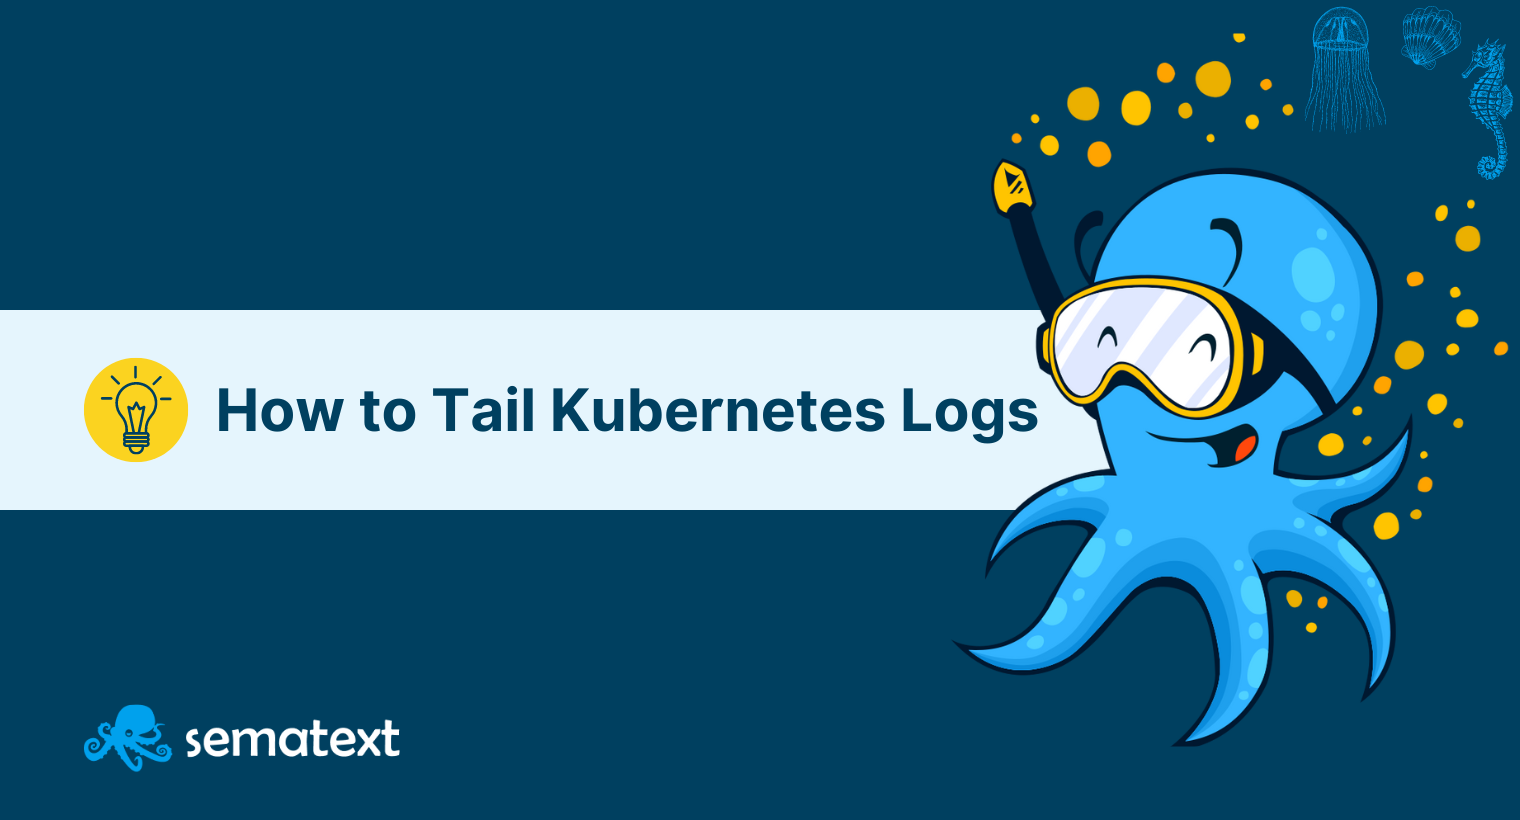 How-to-Tail-Kubernetes-Logs.png